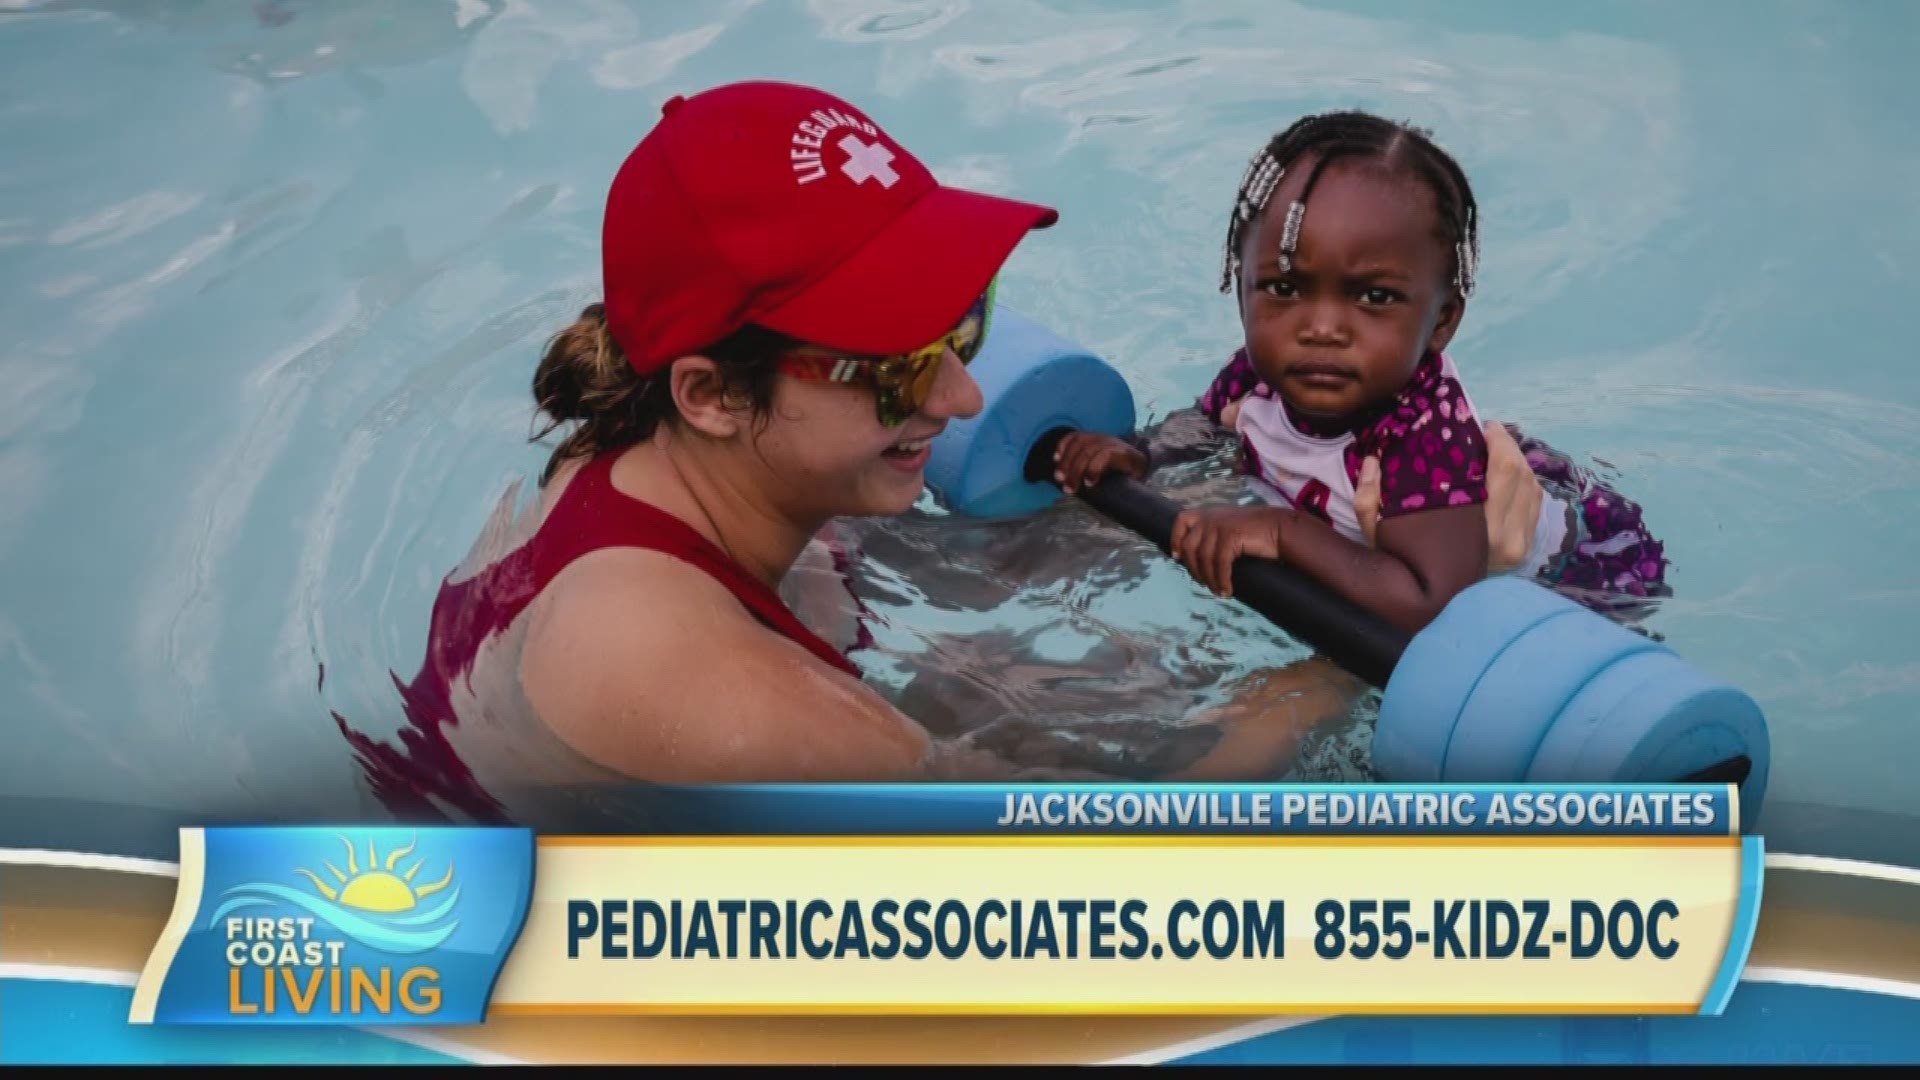 Summer is officially here, a pediatrician shares safety tips to keep in mind the next time the family is out by the pool.